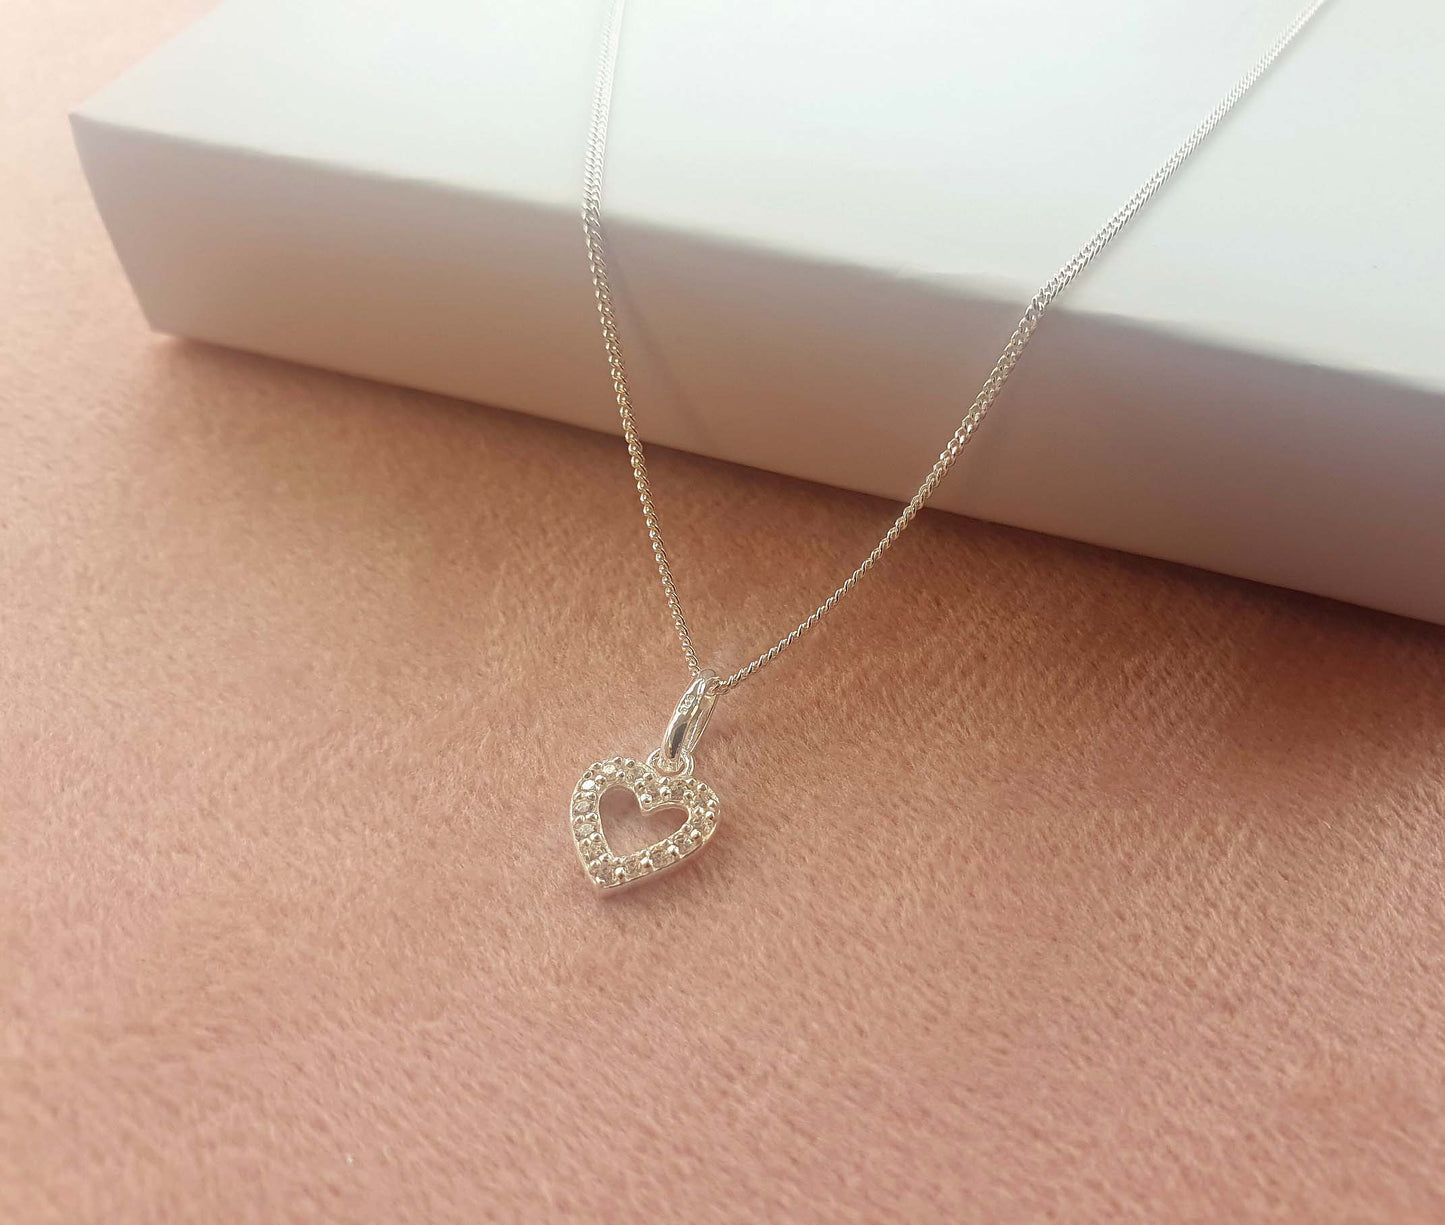 Auntie of the Bride Heart Necklace with Cubic Zirconia in Sterling Silver 925, Personalised Gift